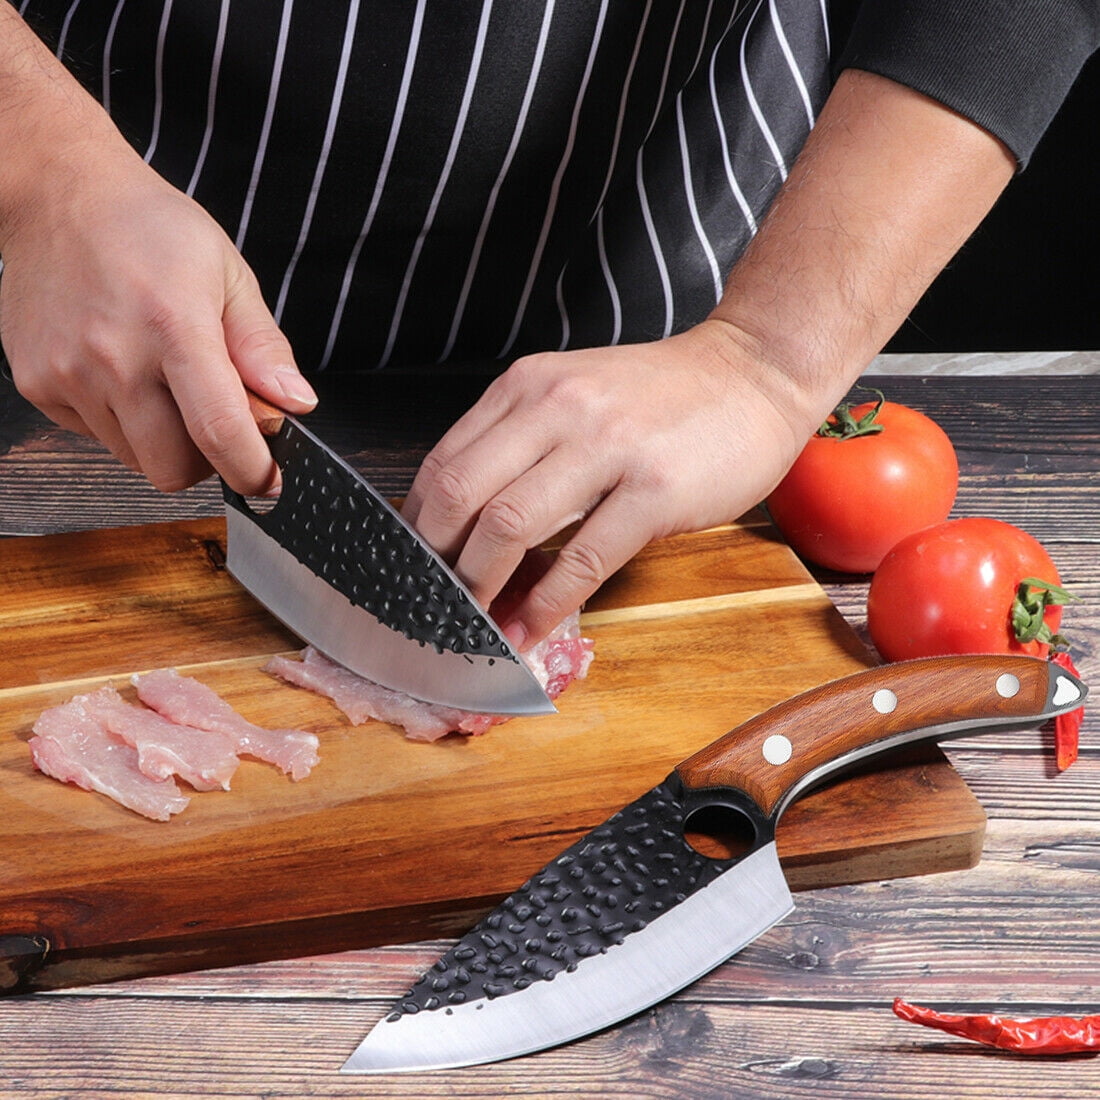 Chef's Kitchen Knives Chinese Cleaver High Carbon Steel BBQ Camping Butcher